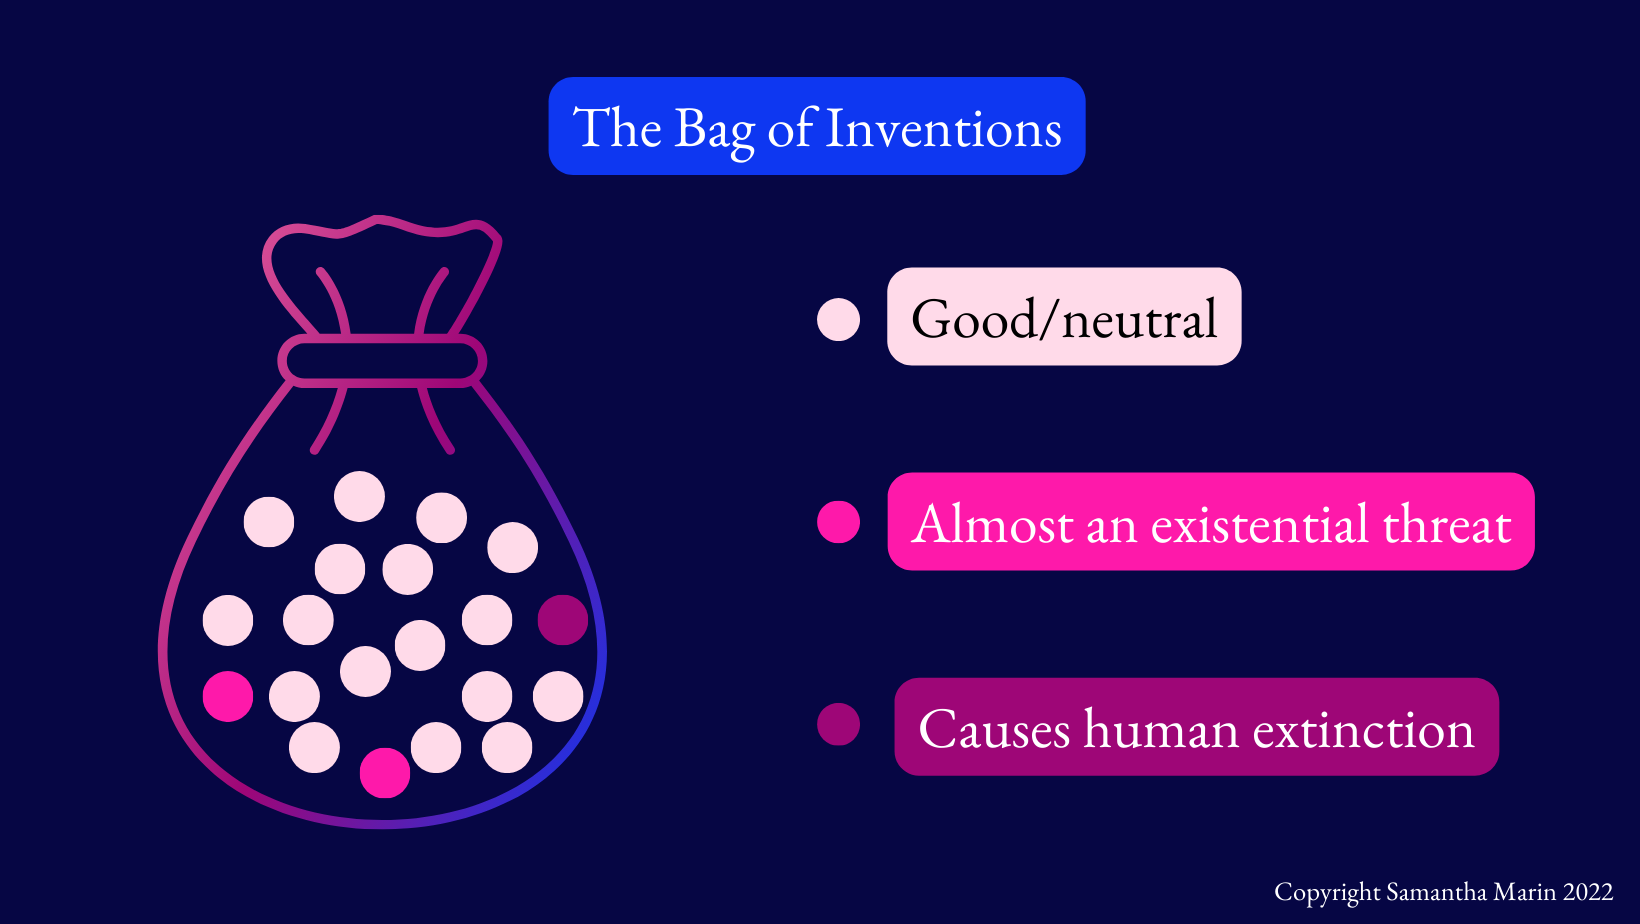 The bag of human inventions is full of mostly good/neutral inventions, with a very small few that aren't.